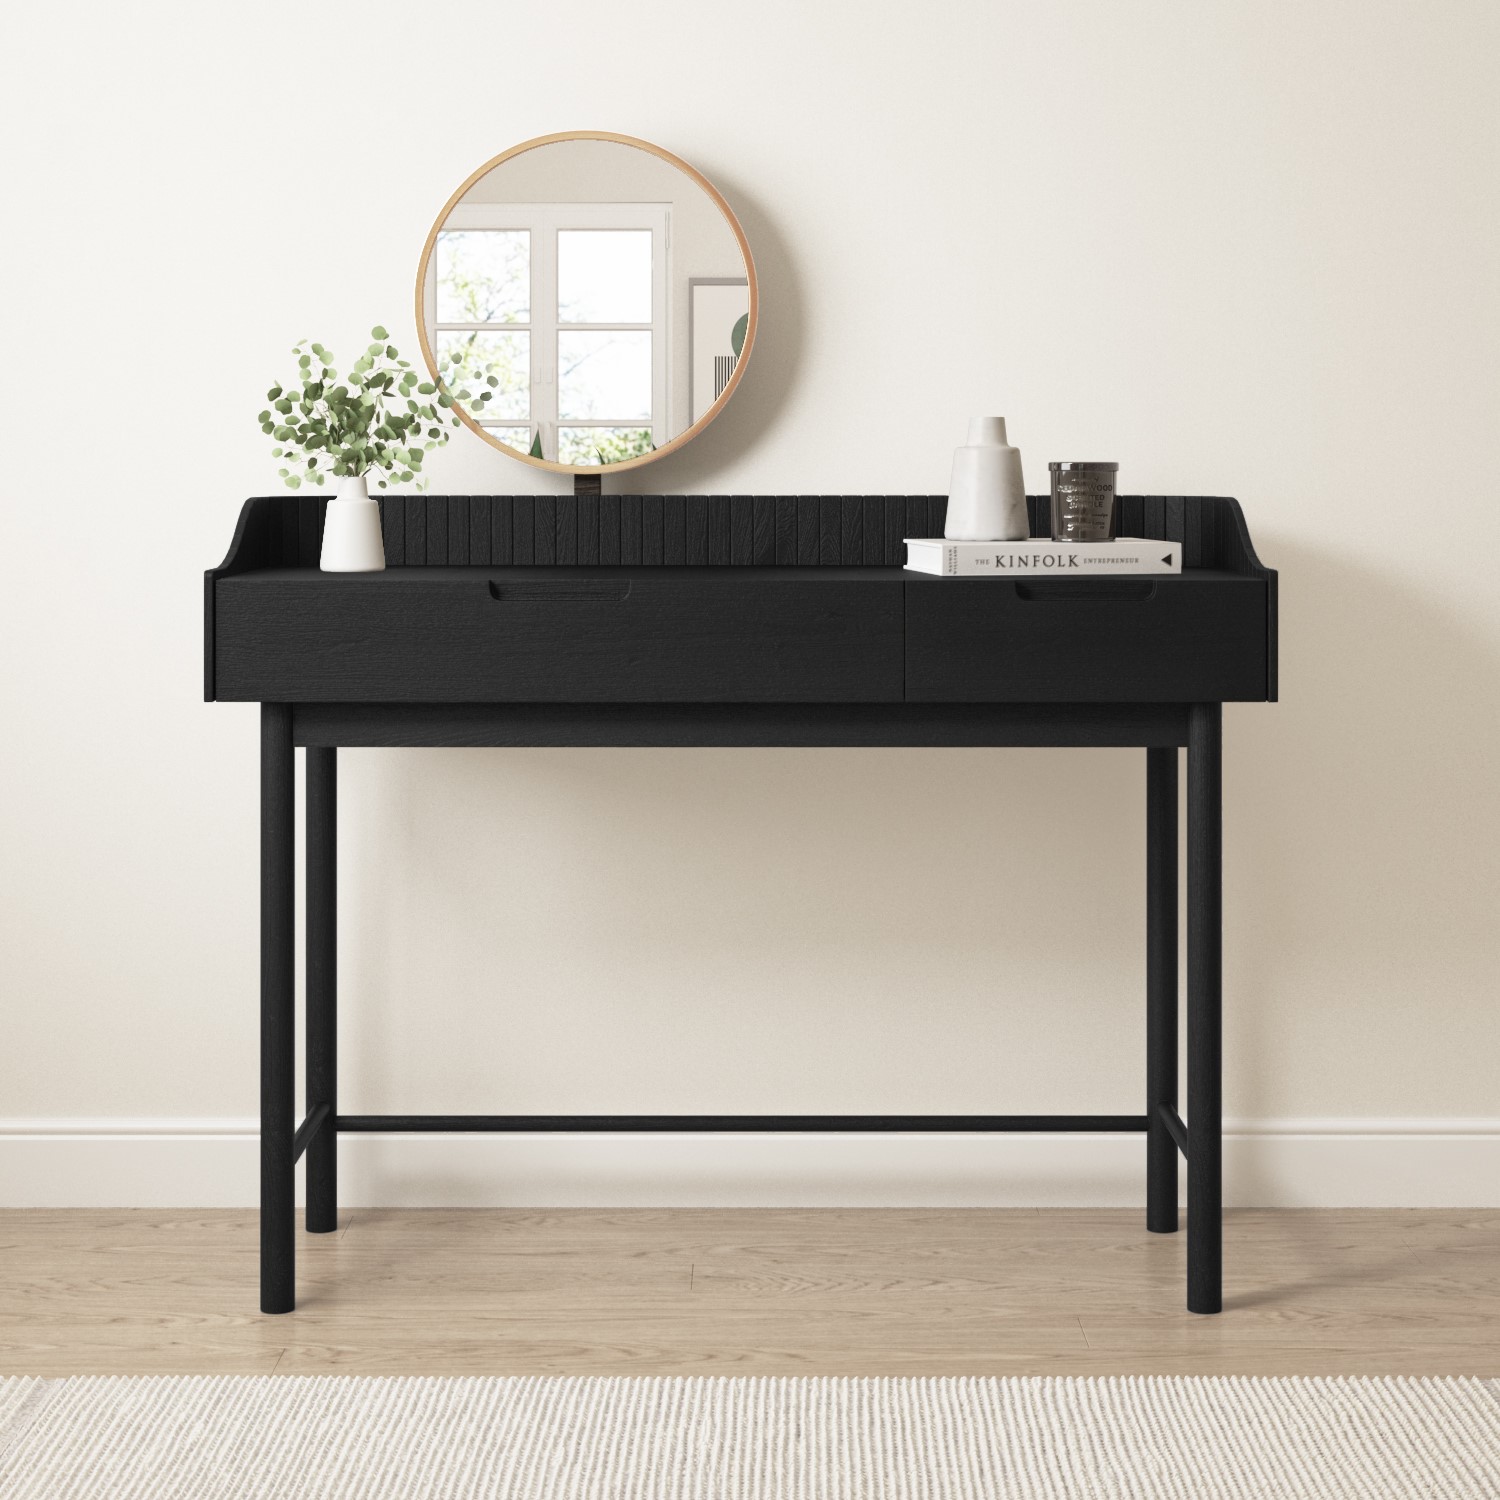 Photo of Black mid-century modern dressing table with mirror and drawers - saskia